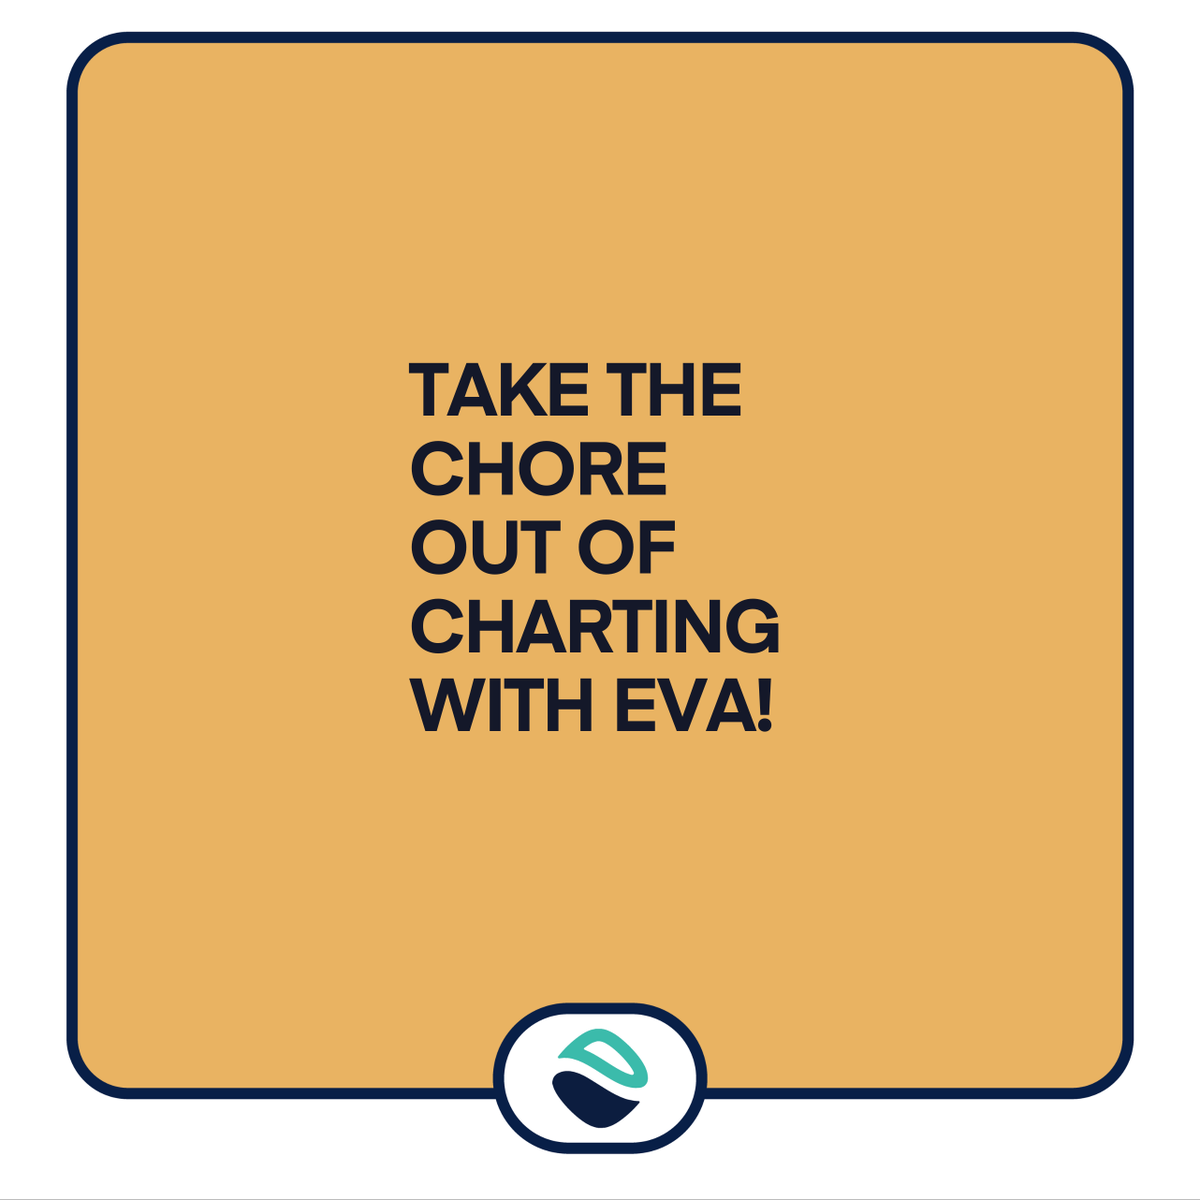 We can all agree documentation is not our favorite part of the job. Thankfully, #EvaHealth was created by a doctor to do the heavy lifting - compliant, organized, + complete! Plus, Eva creates a streamlined #clinicworkflow the whole staff enjoys. 

See Eva make it easy! 🔗 in bio